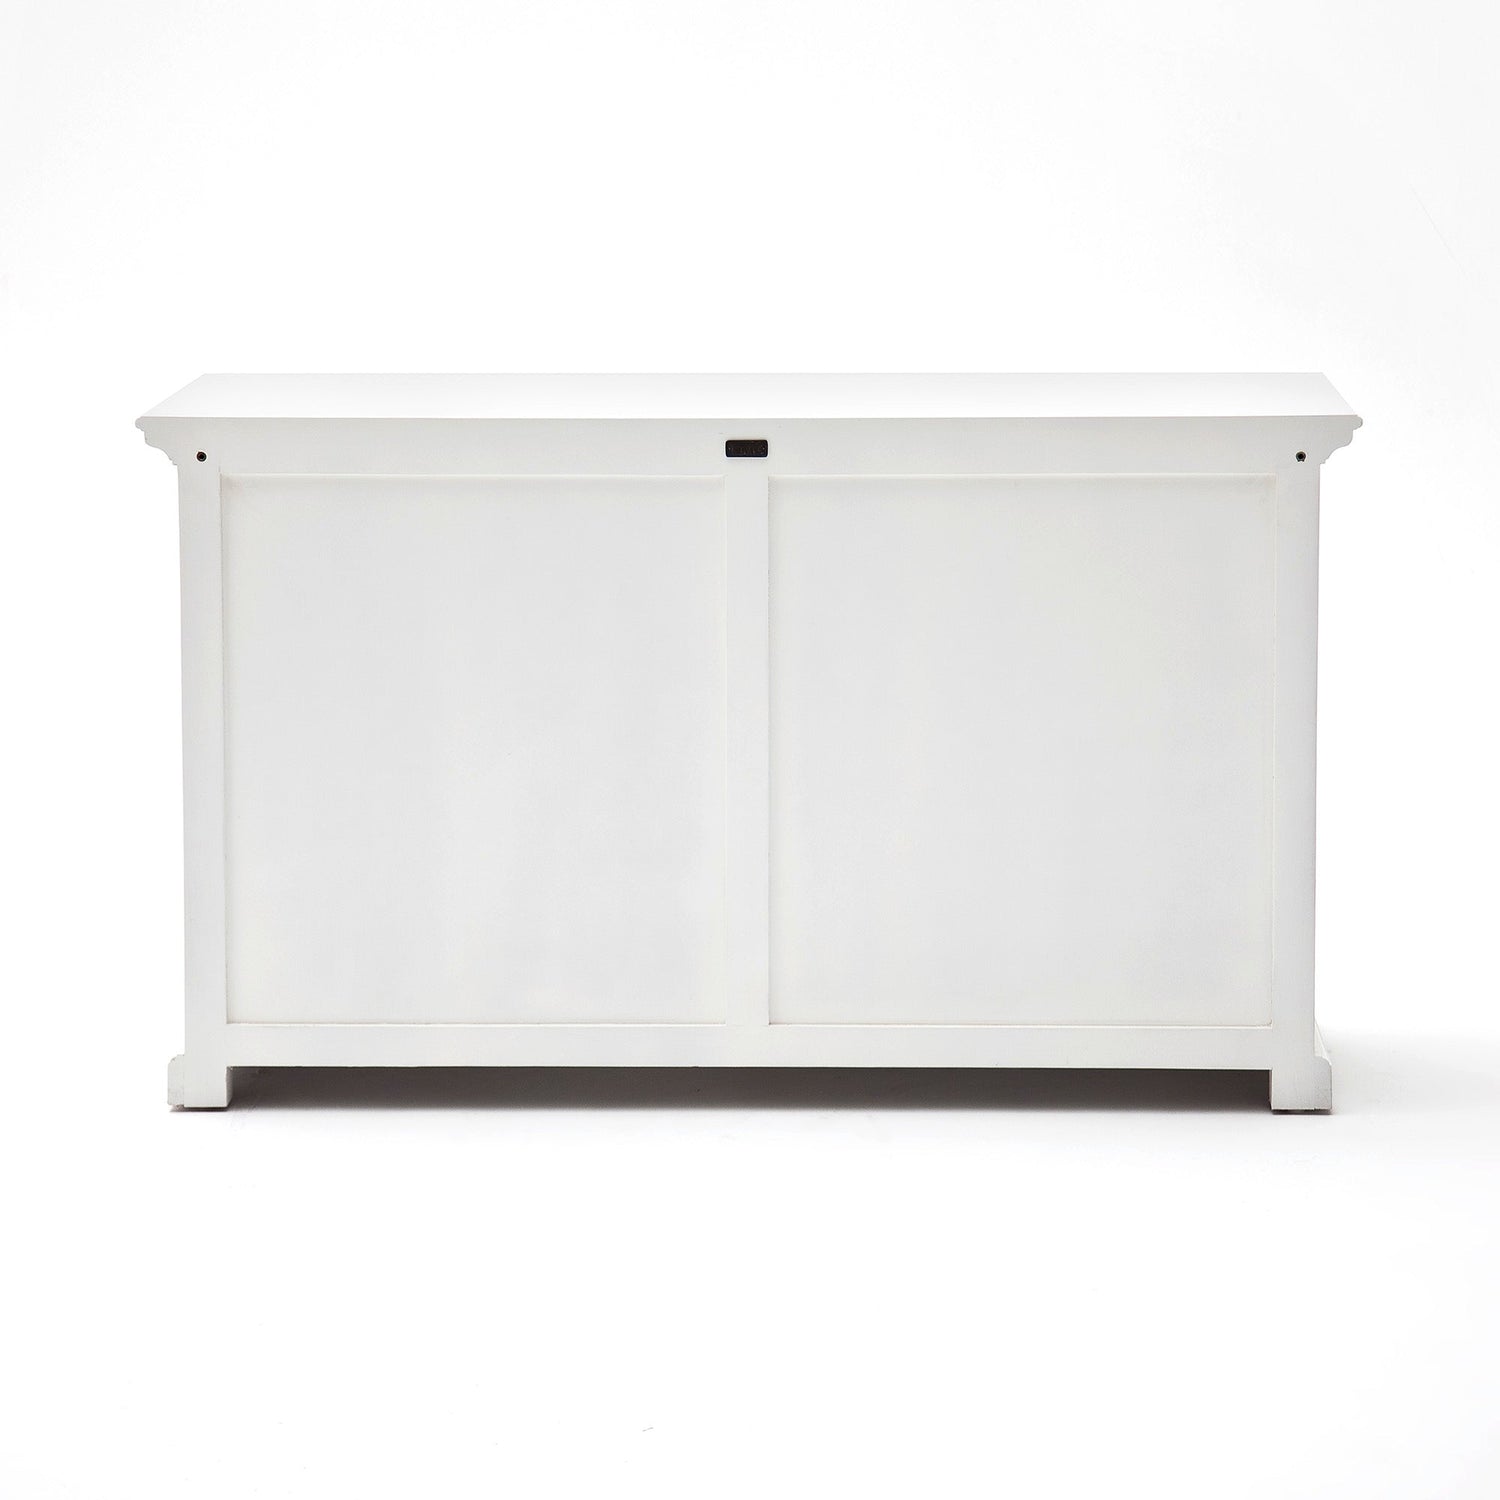 Provence classic sideboard with 3 doors